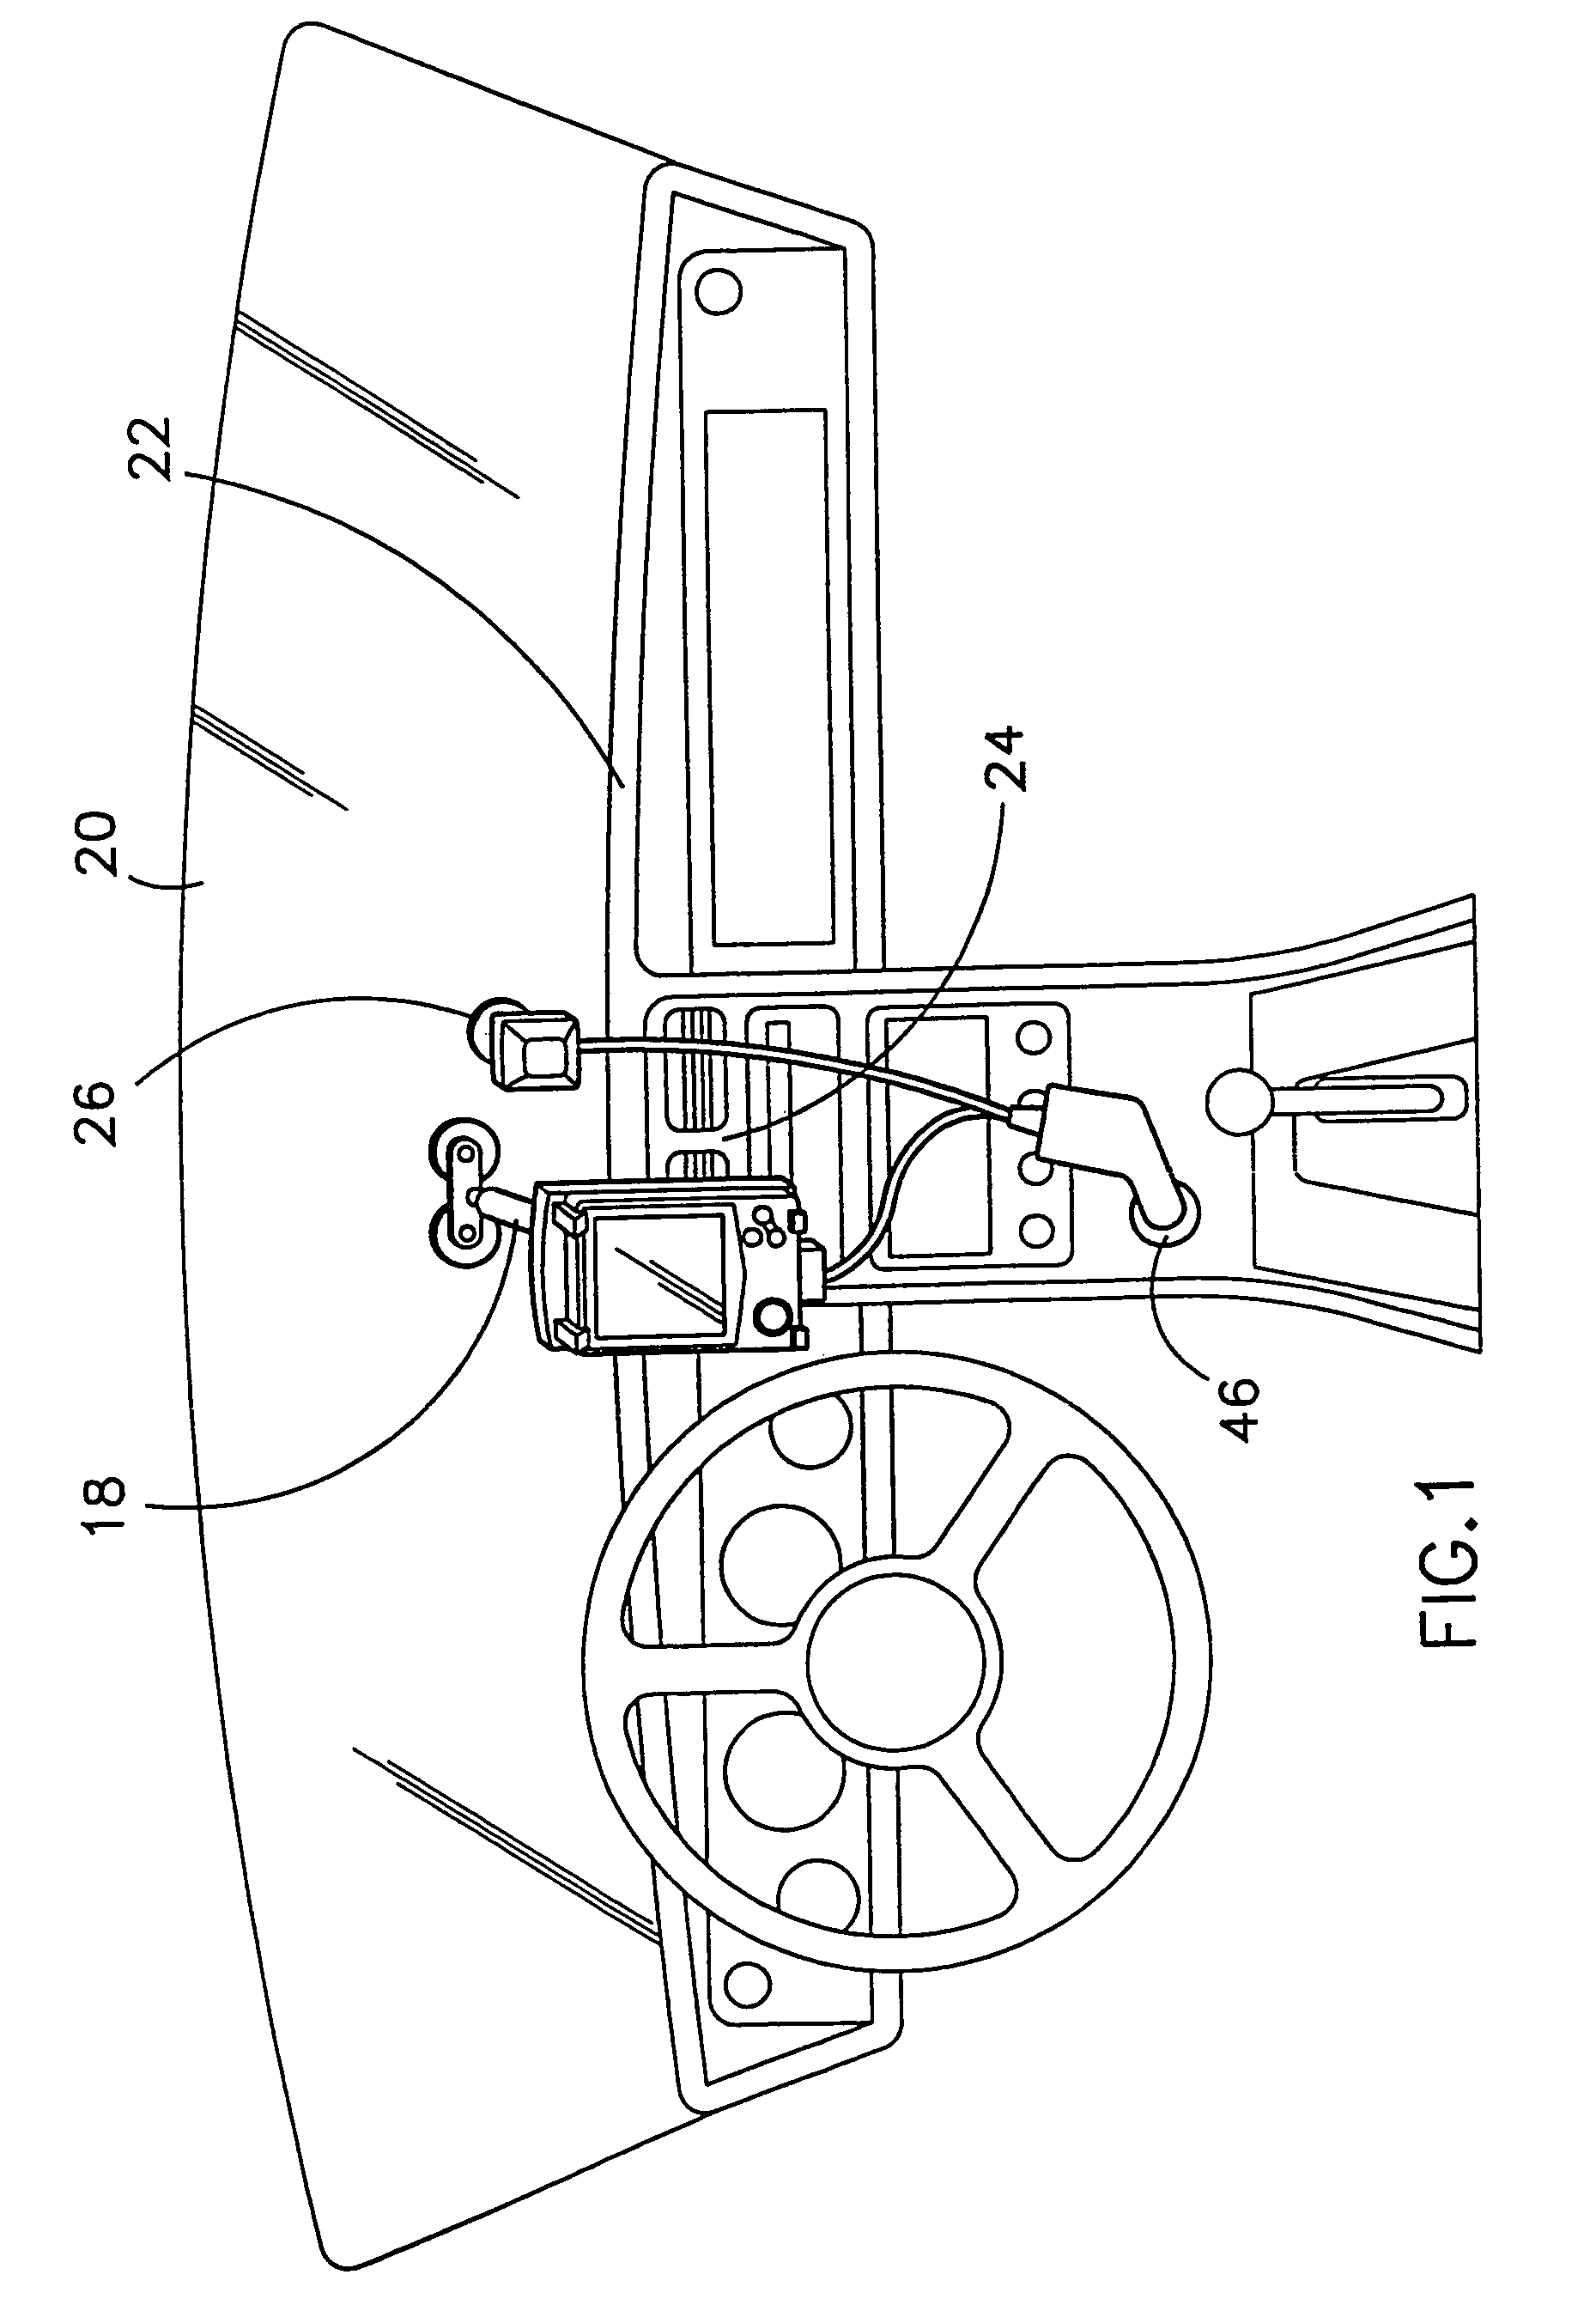 Integrated connection assembly for global positioning system (GPS) receiver and personal digital assistance (PDA) device and cellular phone